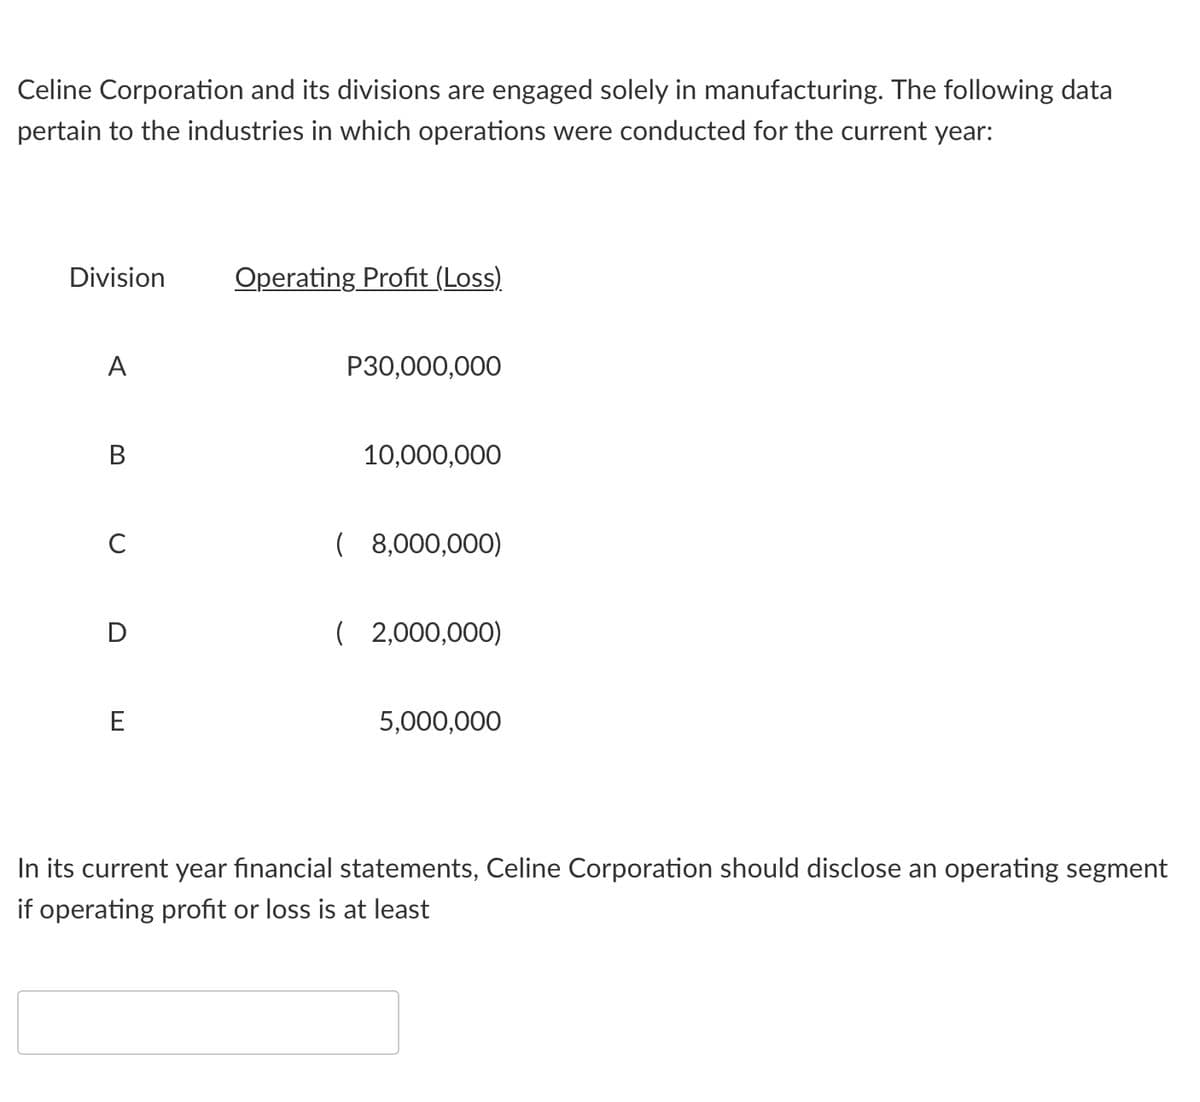 Celine Corporation and its divisions are engaged solely in manufacturing. The following data
pertain to the industries in which operations were conducted for the current year:
Division
Operating Profit (Loss)
A
P30,000,000
В
10,000,000
( 8,000,000)
D
( 2,000,000)
E
5,000,000
In its current year financial statements, Celine Corporation should disclose an operating segment
if operating profit or loss is at least
